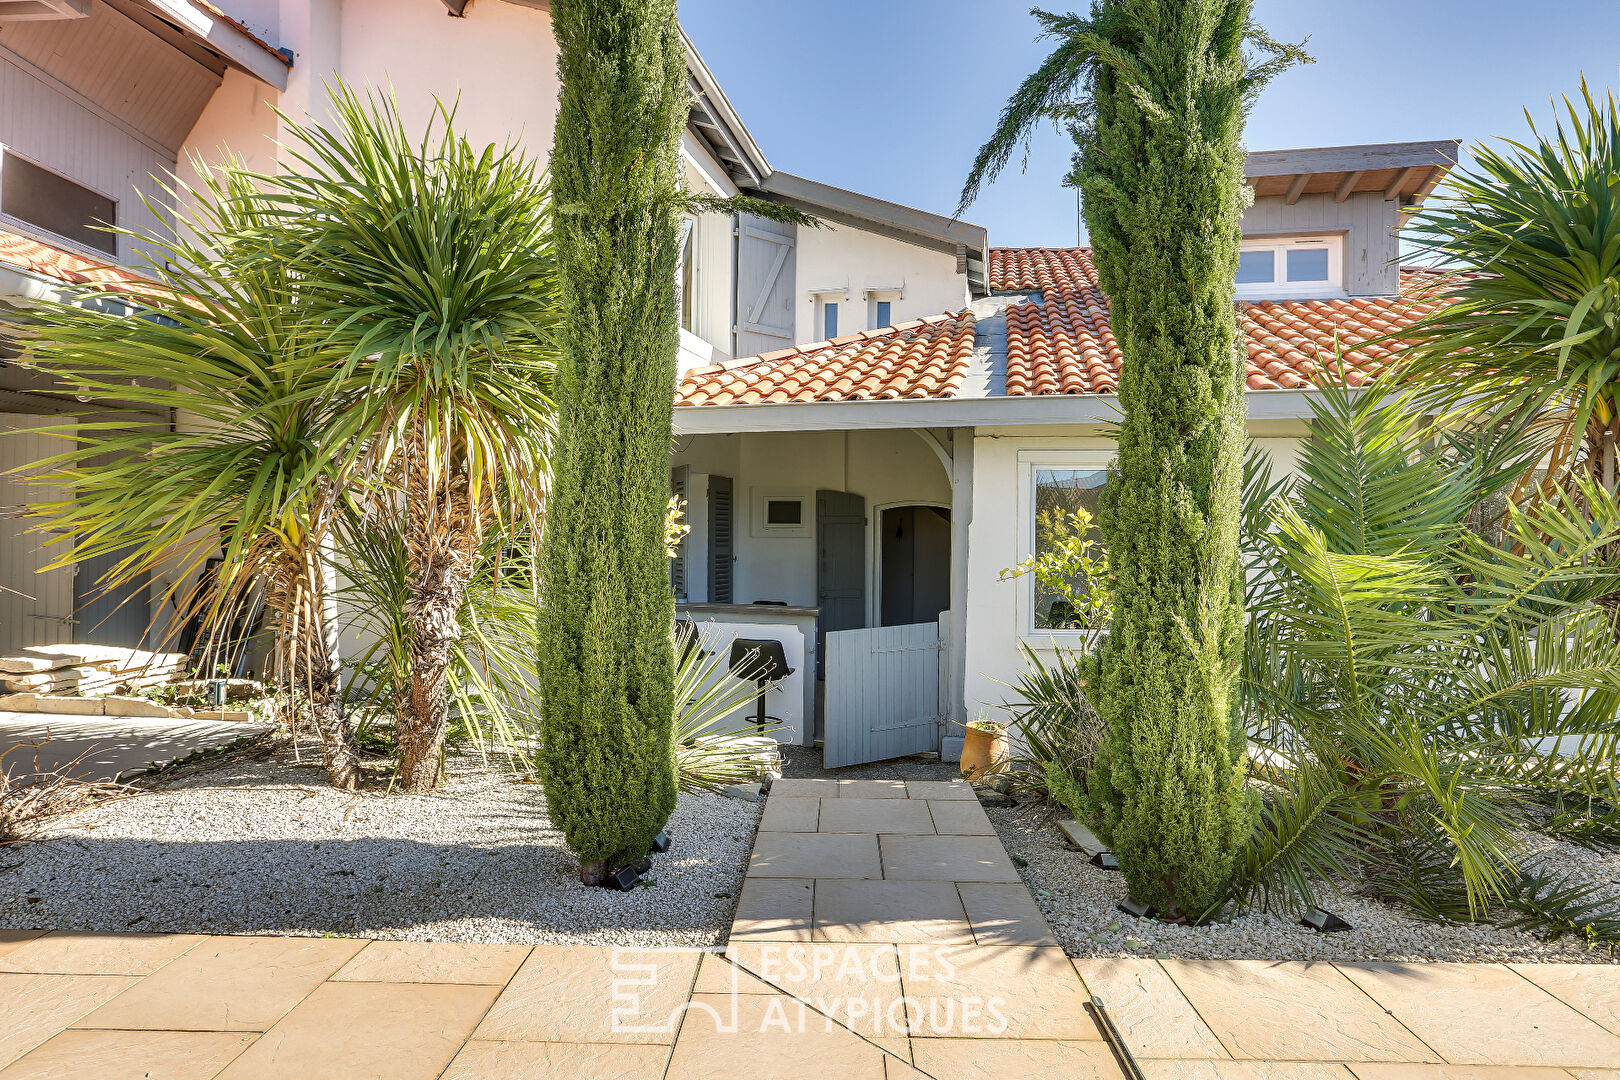 Charming house, with landscaped garden and swimming pool, near the Landes coast.